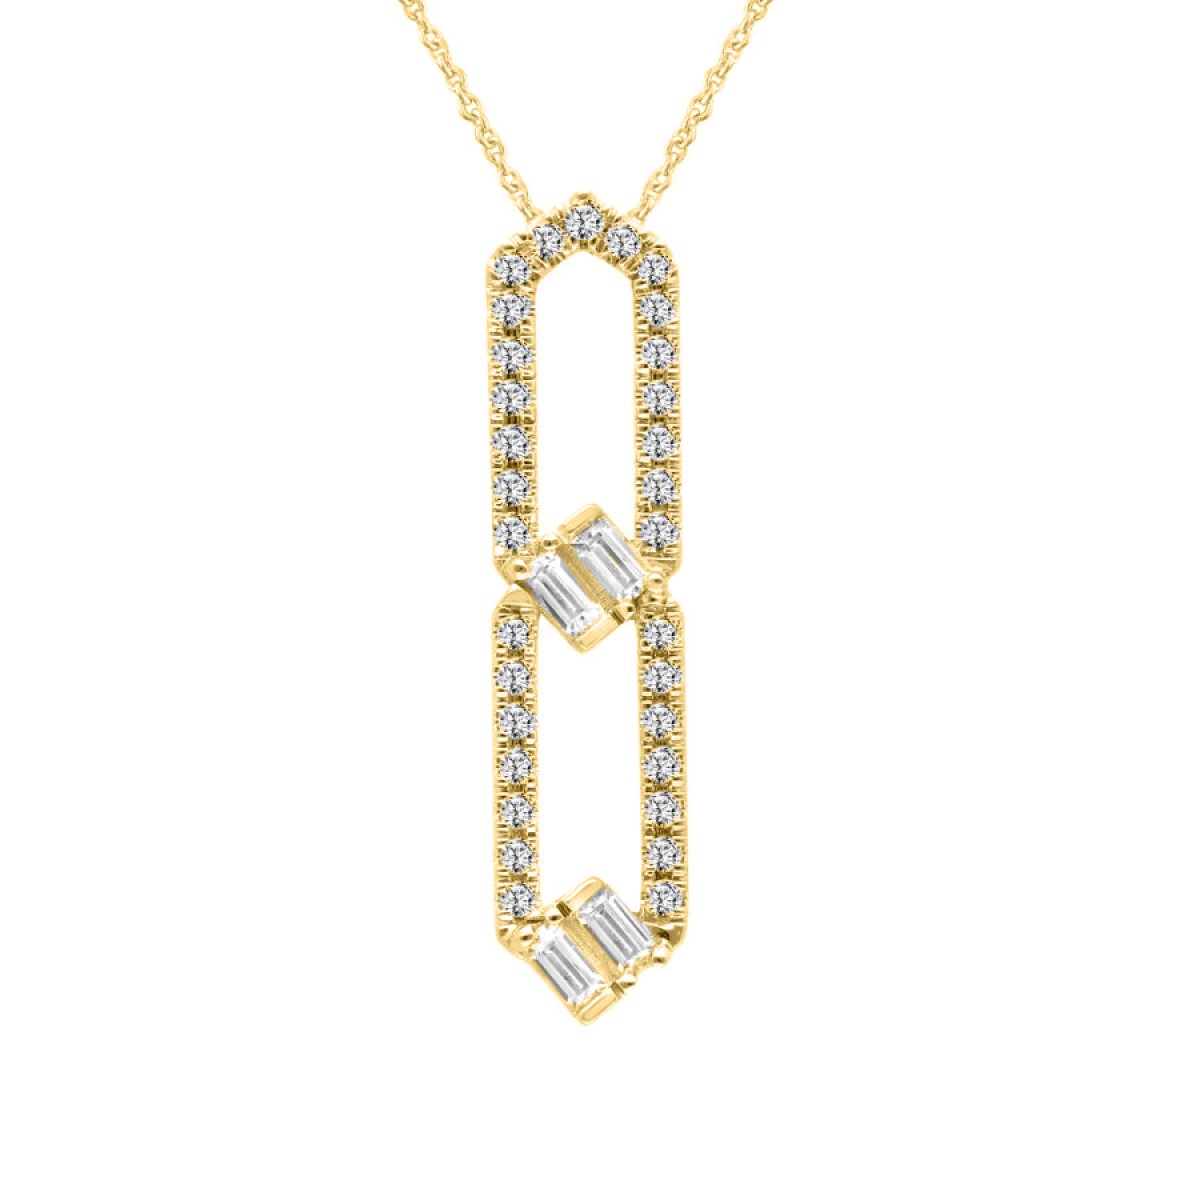 14K YELLOW GOLD 1/4CT ROUND/BAGUETTE DIAMOND LADIES PENDANT WITH CHAIN  